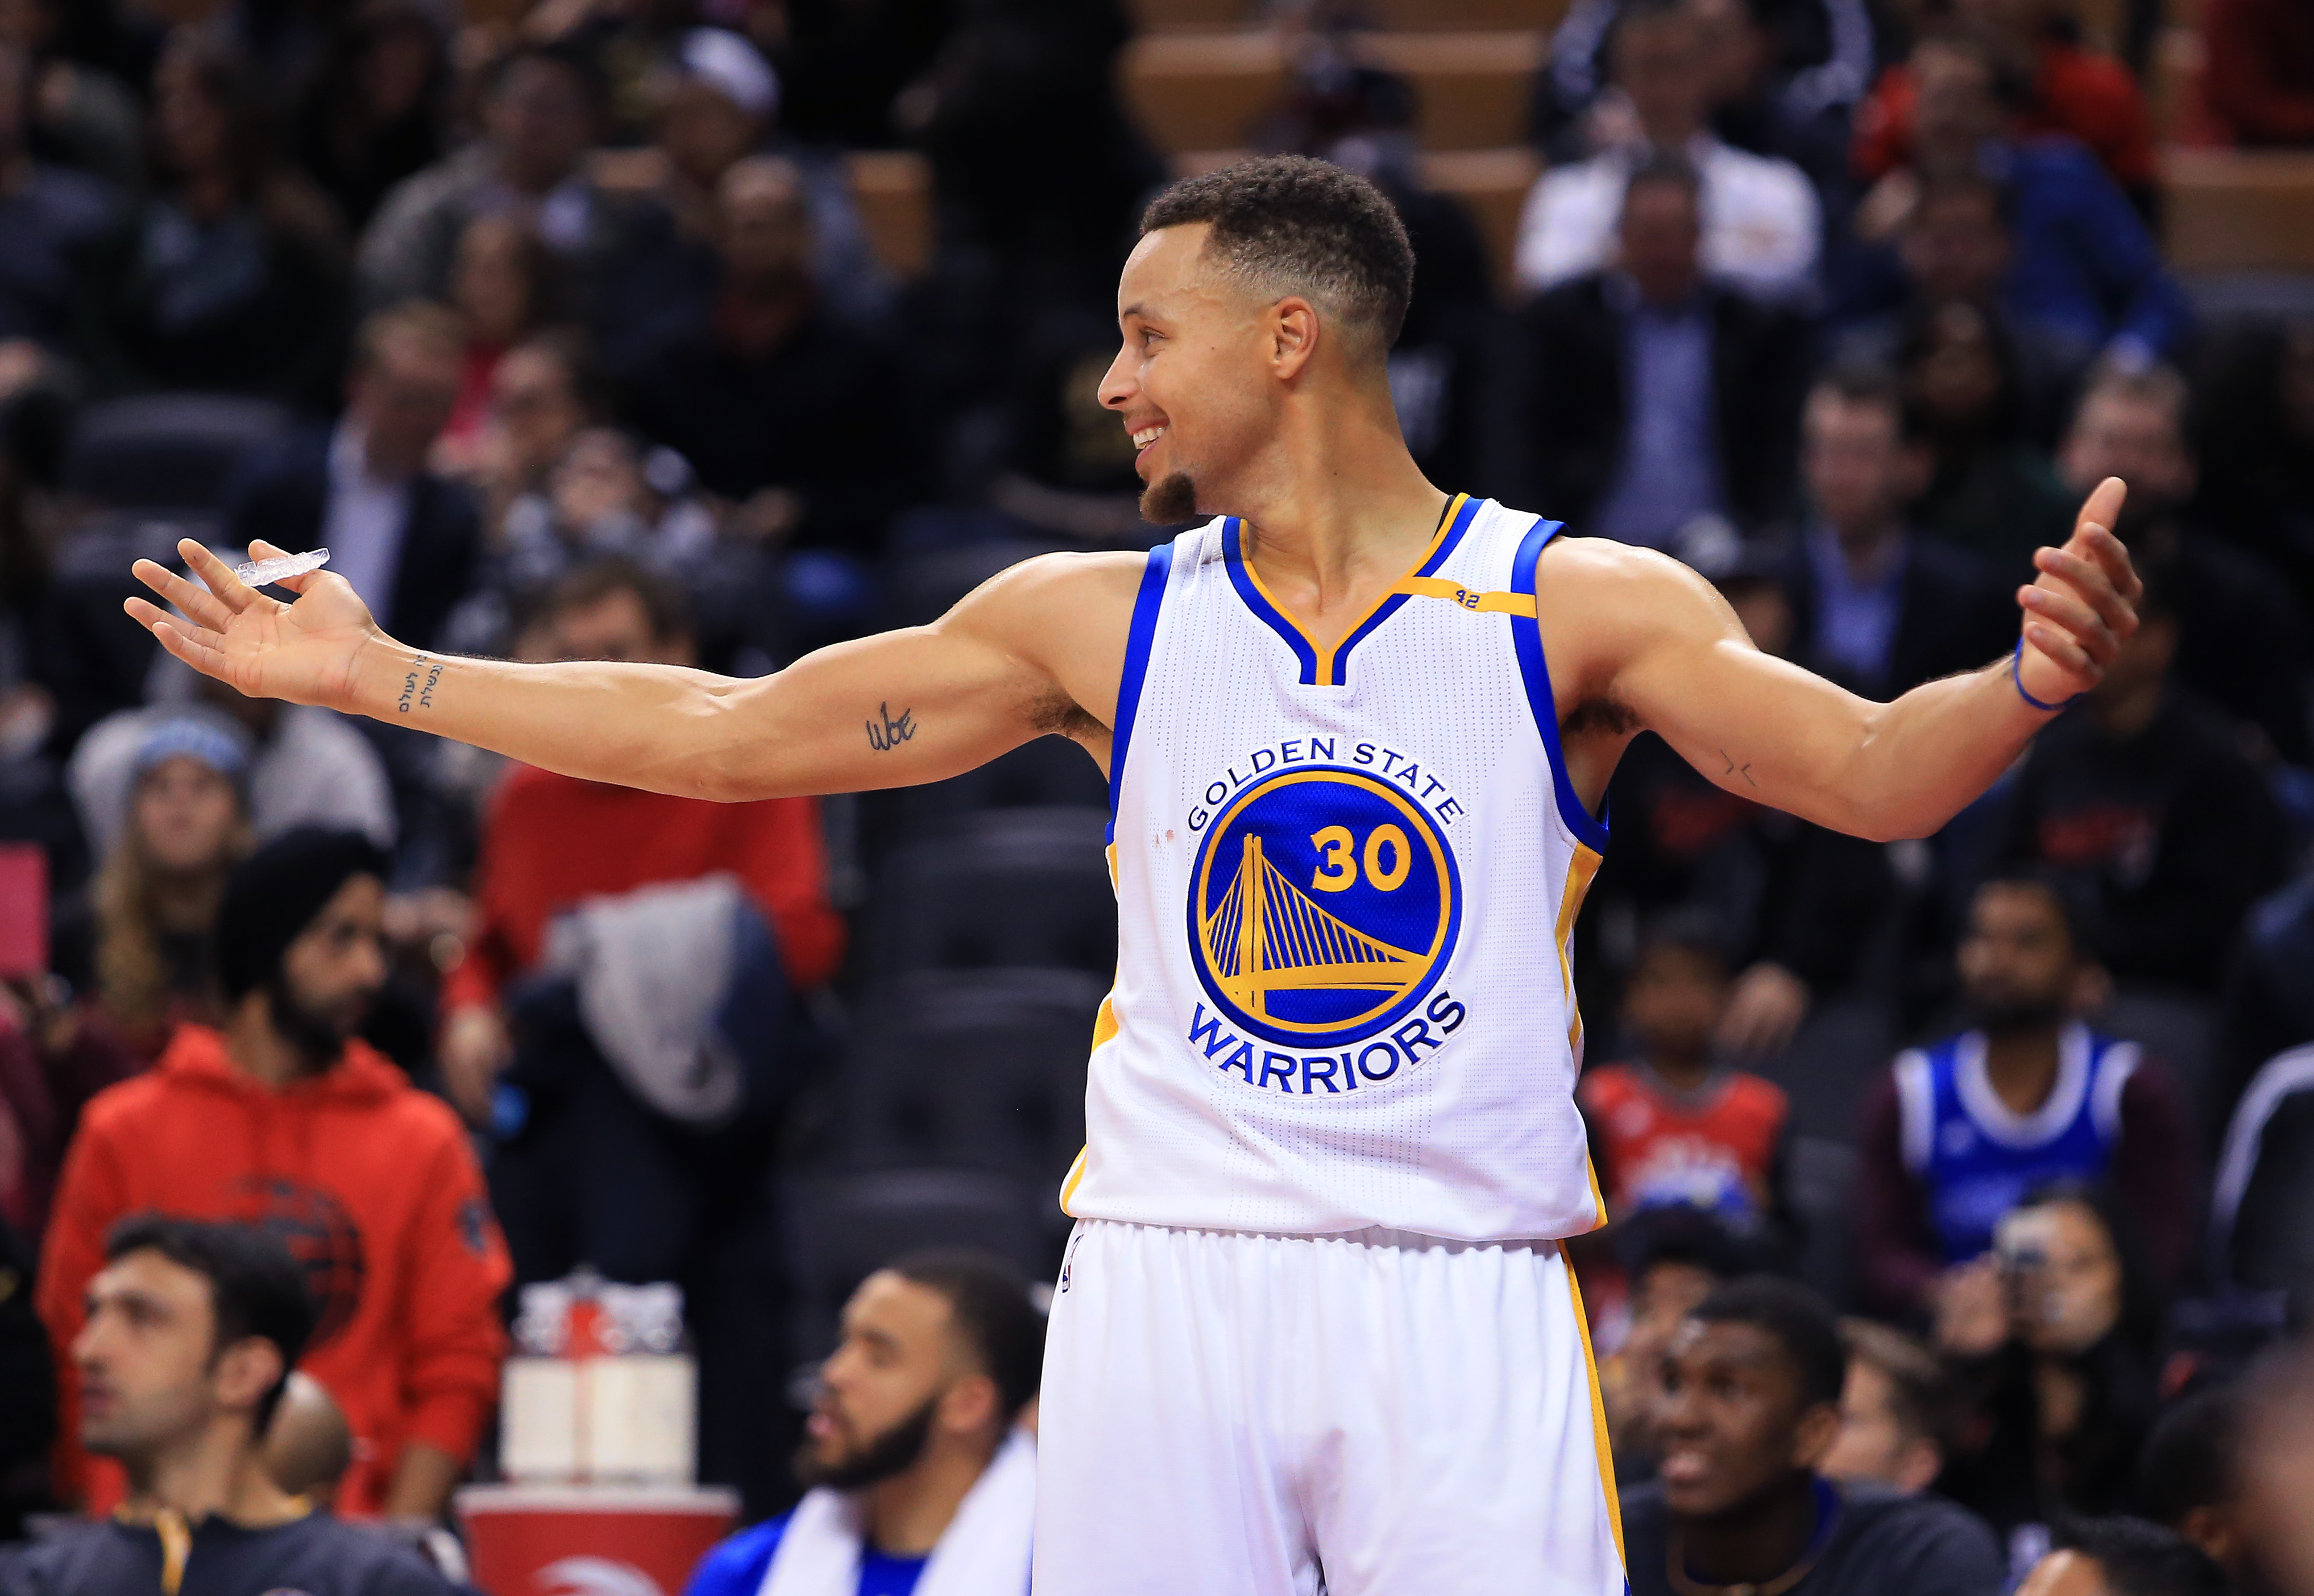 Day-to-Day: We miss the old Steph Curry - The Step Back